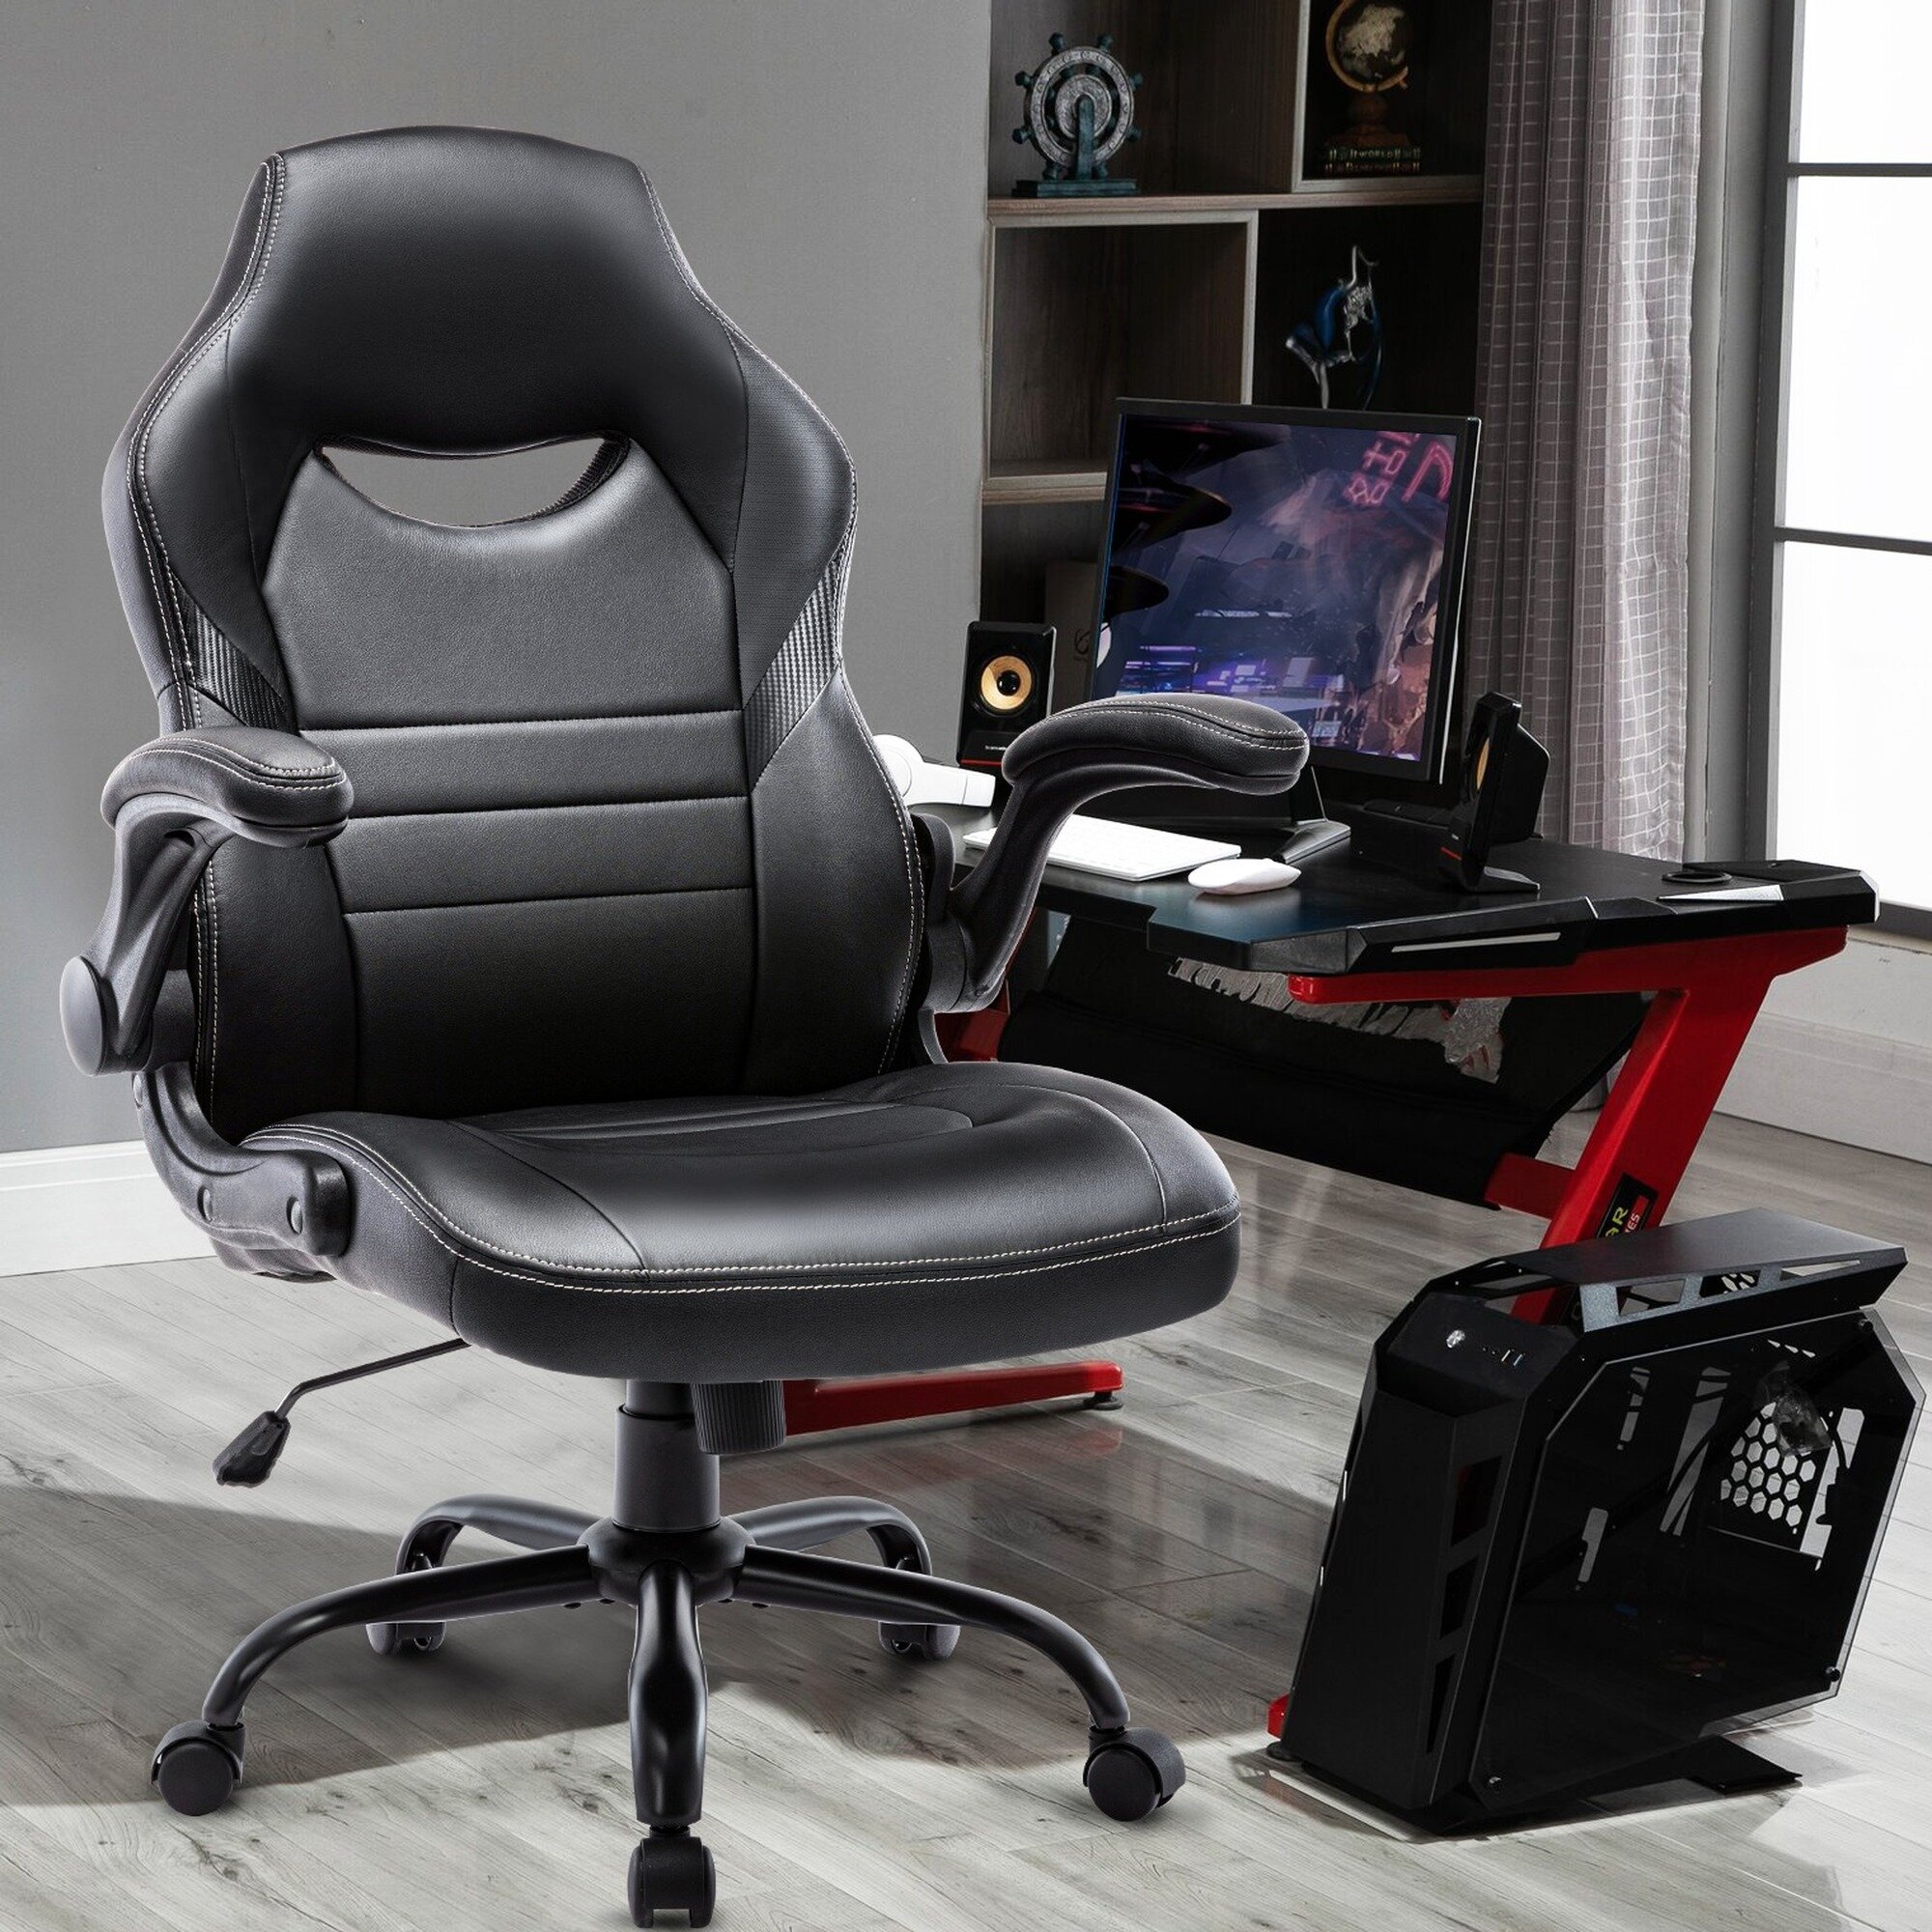 Details about   Ergonomic Office Chair Executive Computer Seat Racing Gaming Swivel Desk Chairs 